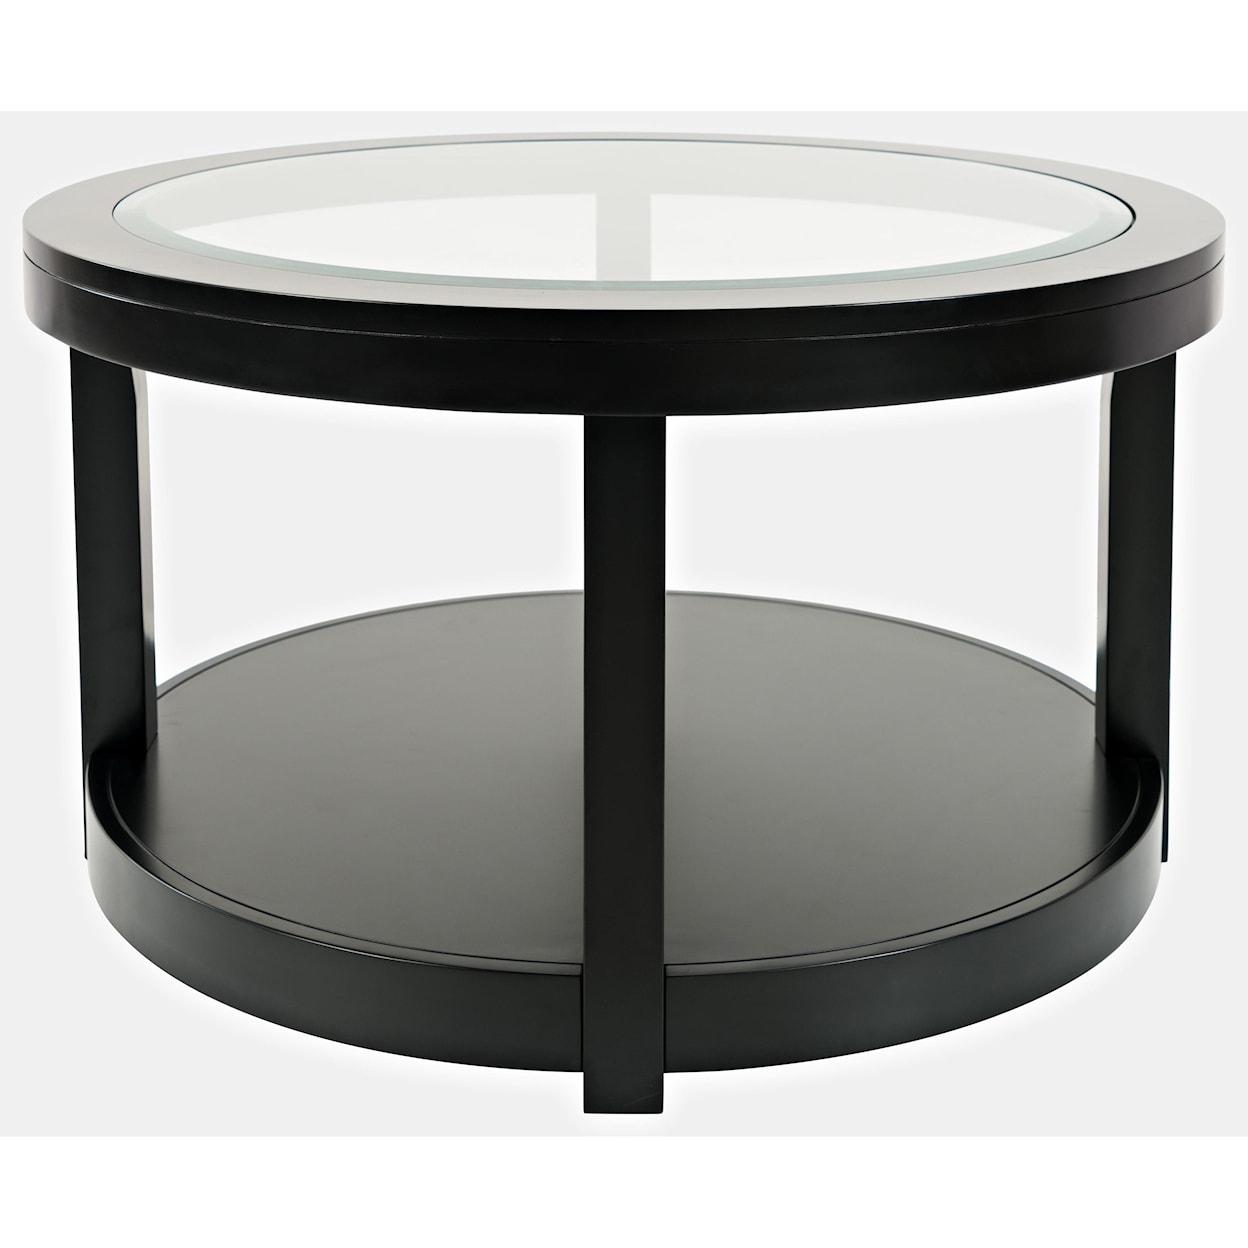 Jofran Icon Black Round Castered Cocktail Table